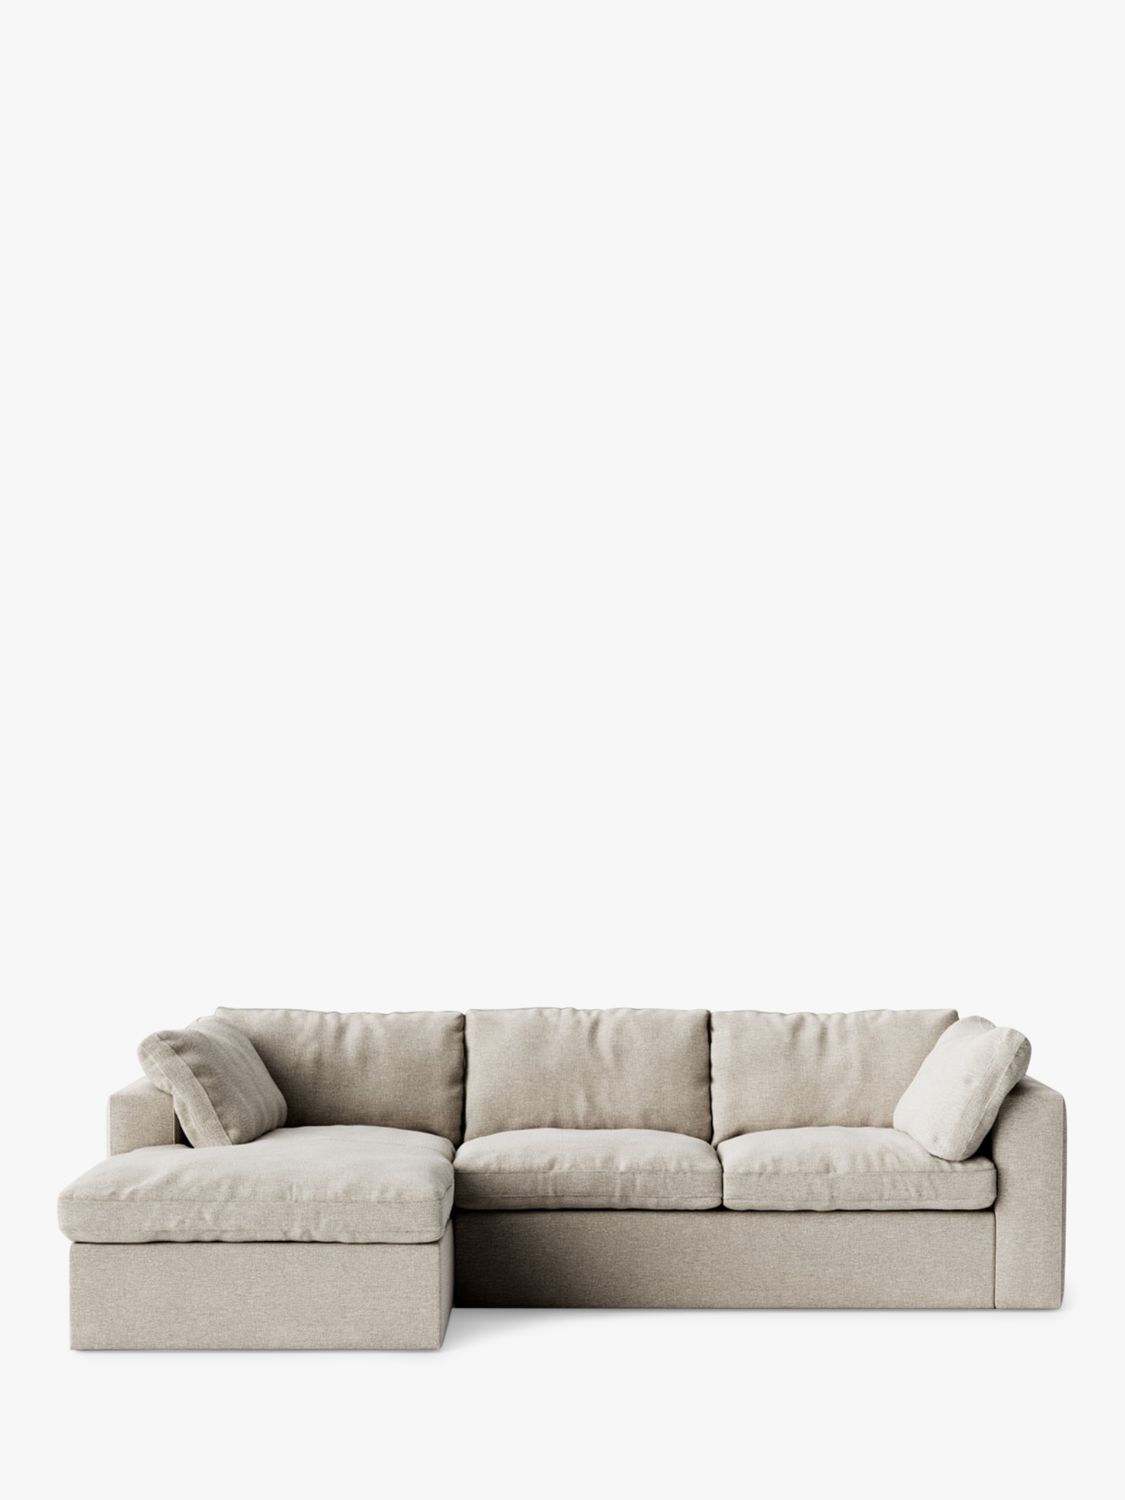 Swoon Seattle Grand 4 Seater LHF Chaise End Sofa